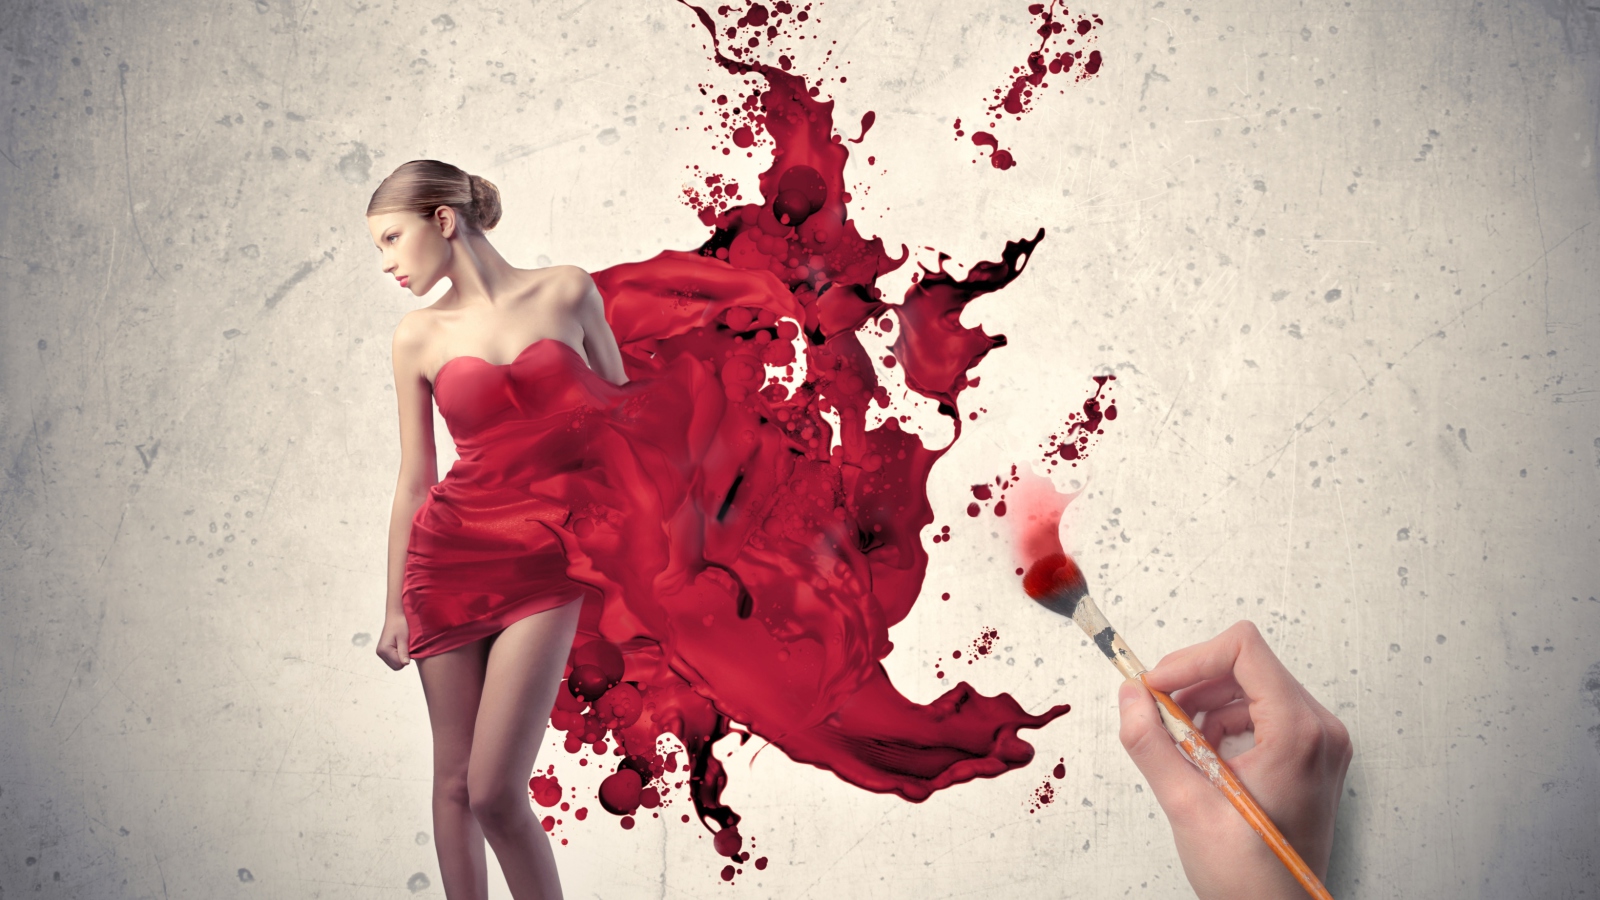 Girl In Painted Red Dress wallpaper 1600x900